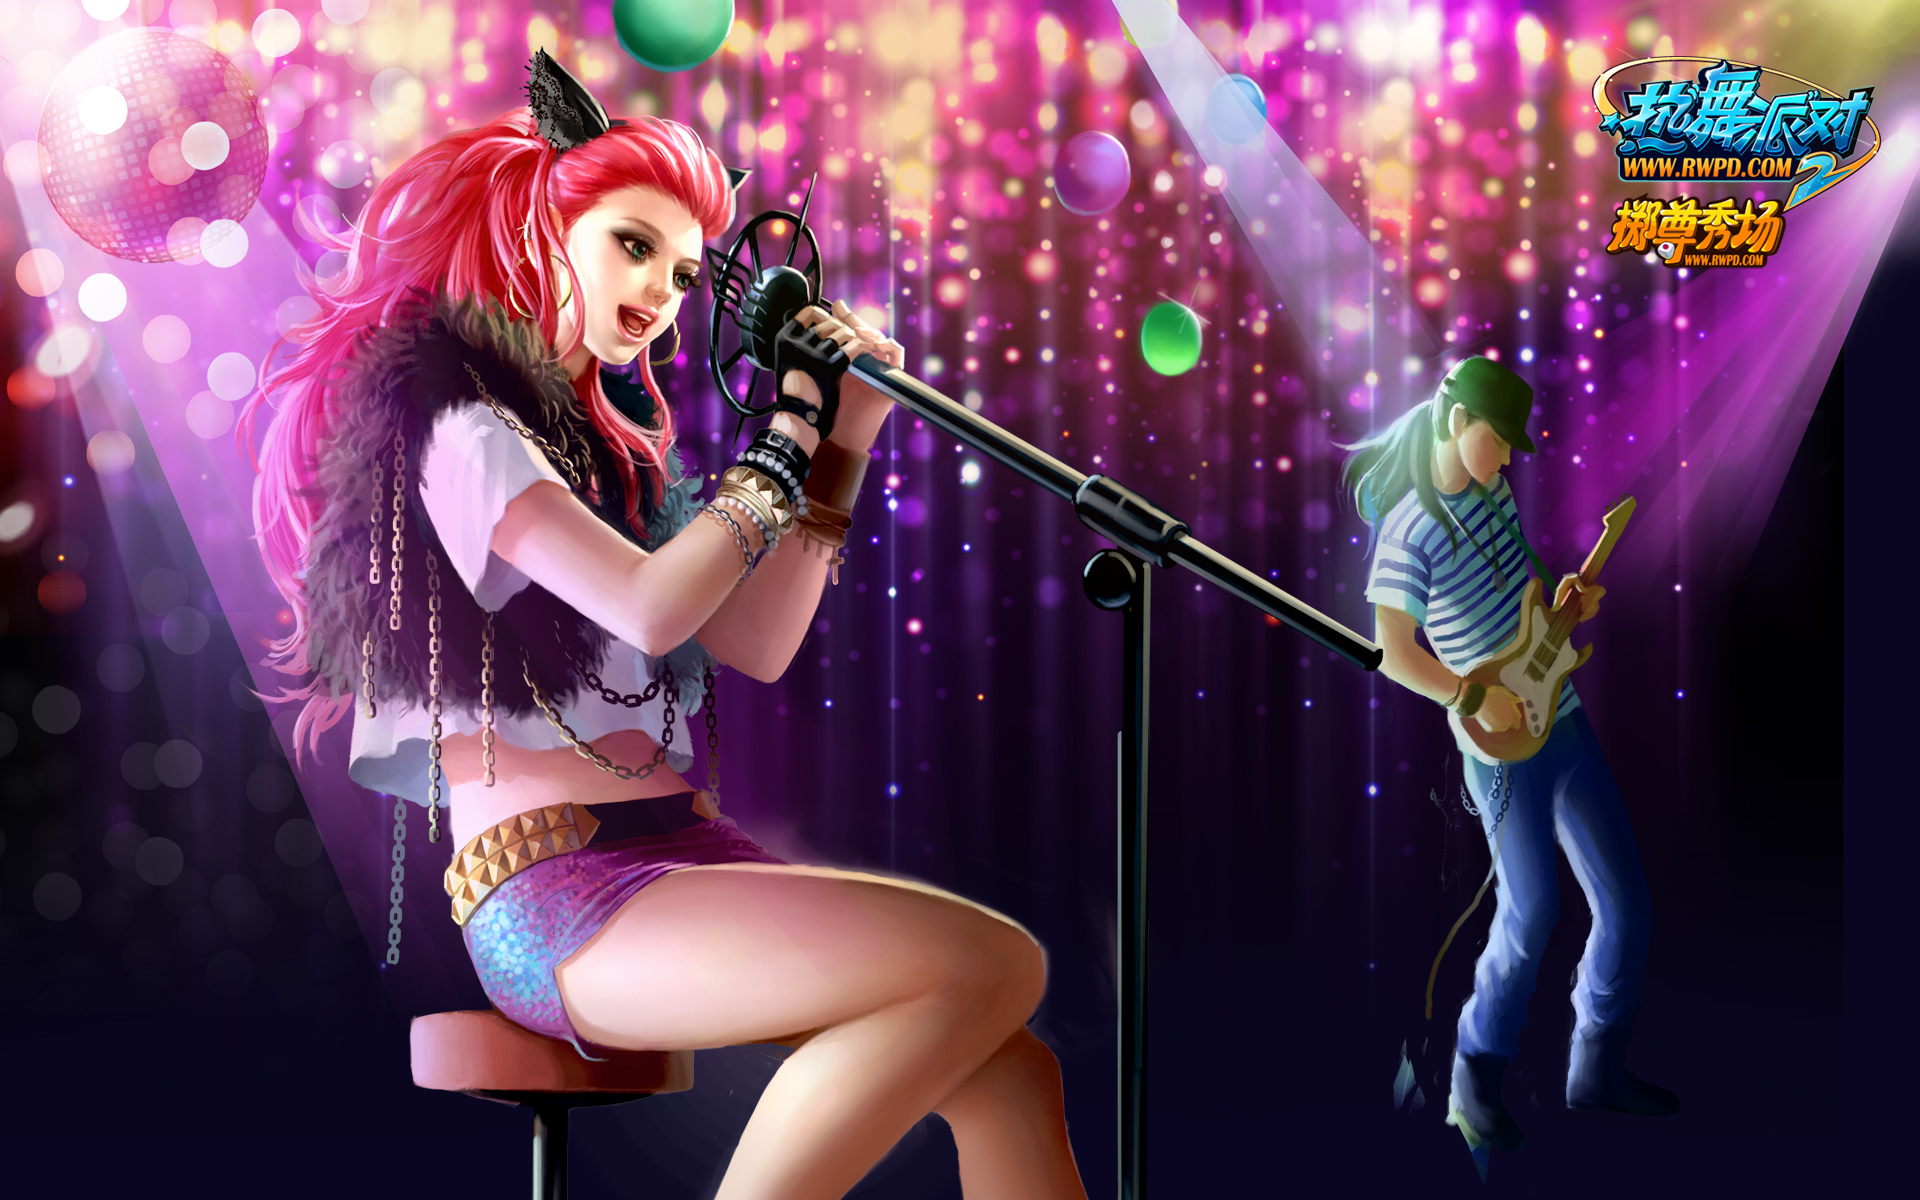 HD desktop wallpaper: Video Game, Hot Dance Party download free picture  #528910